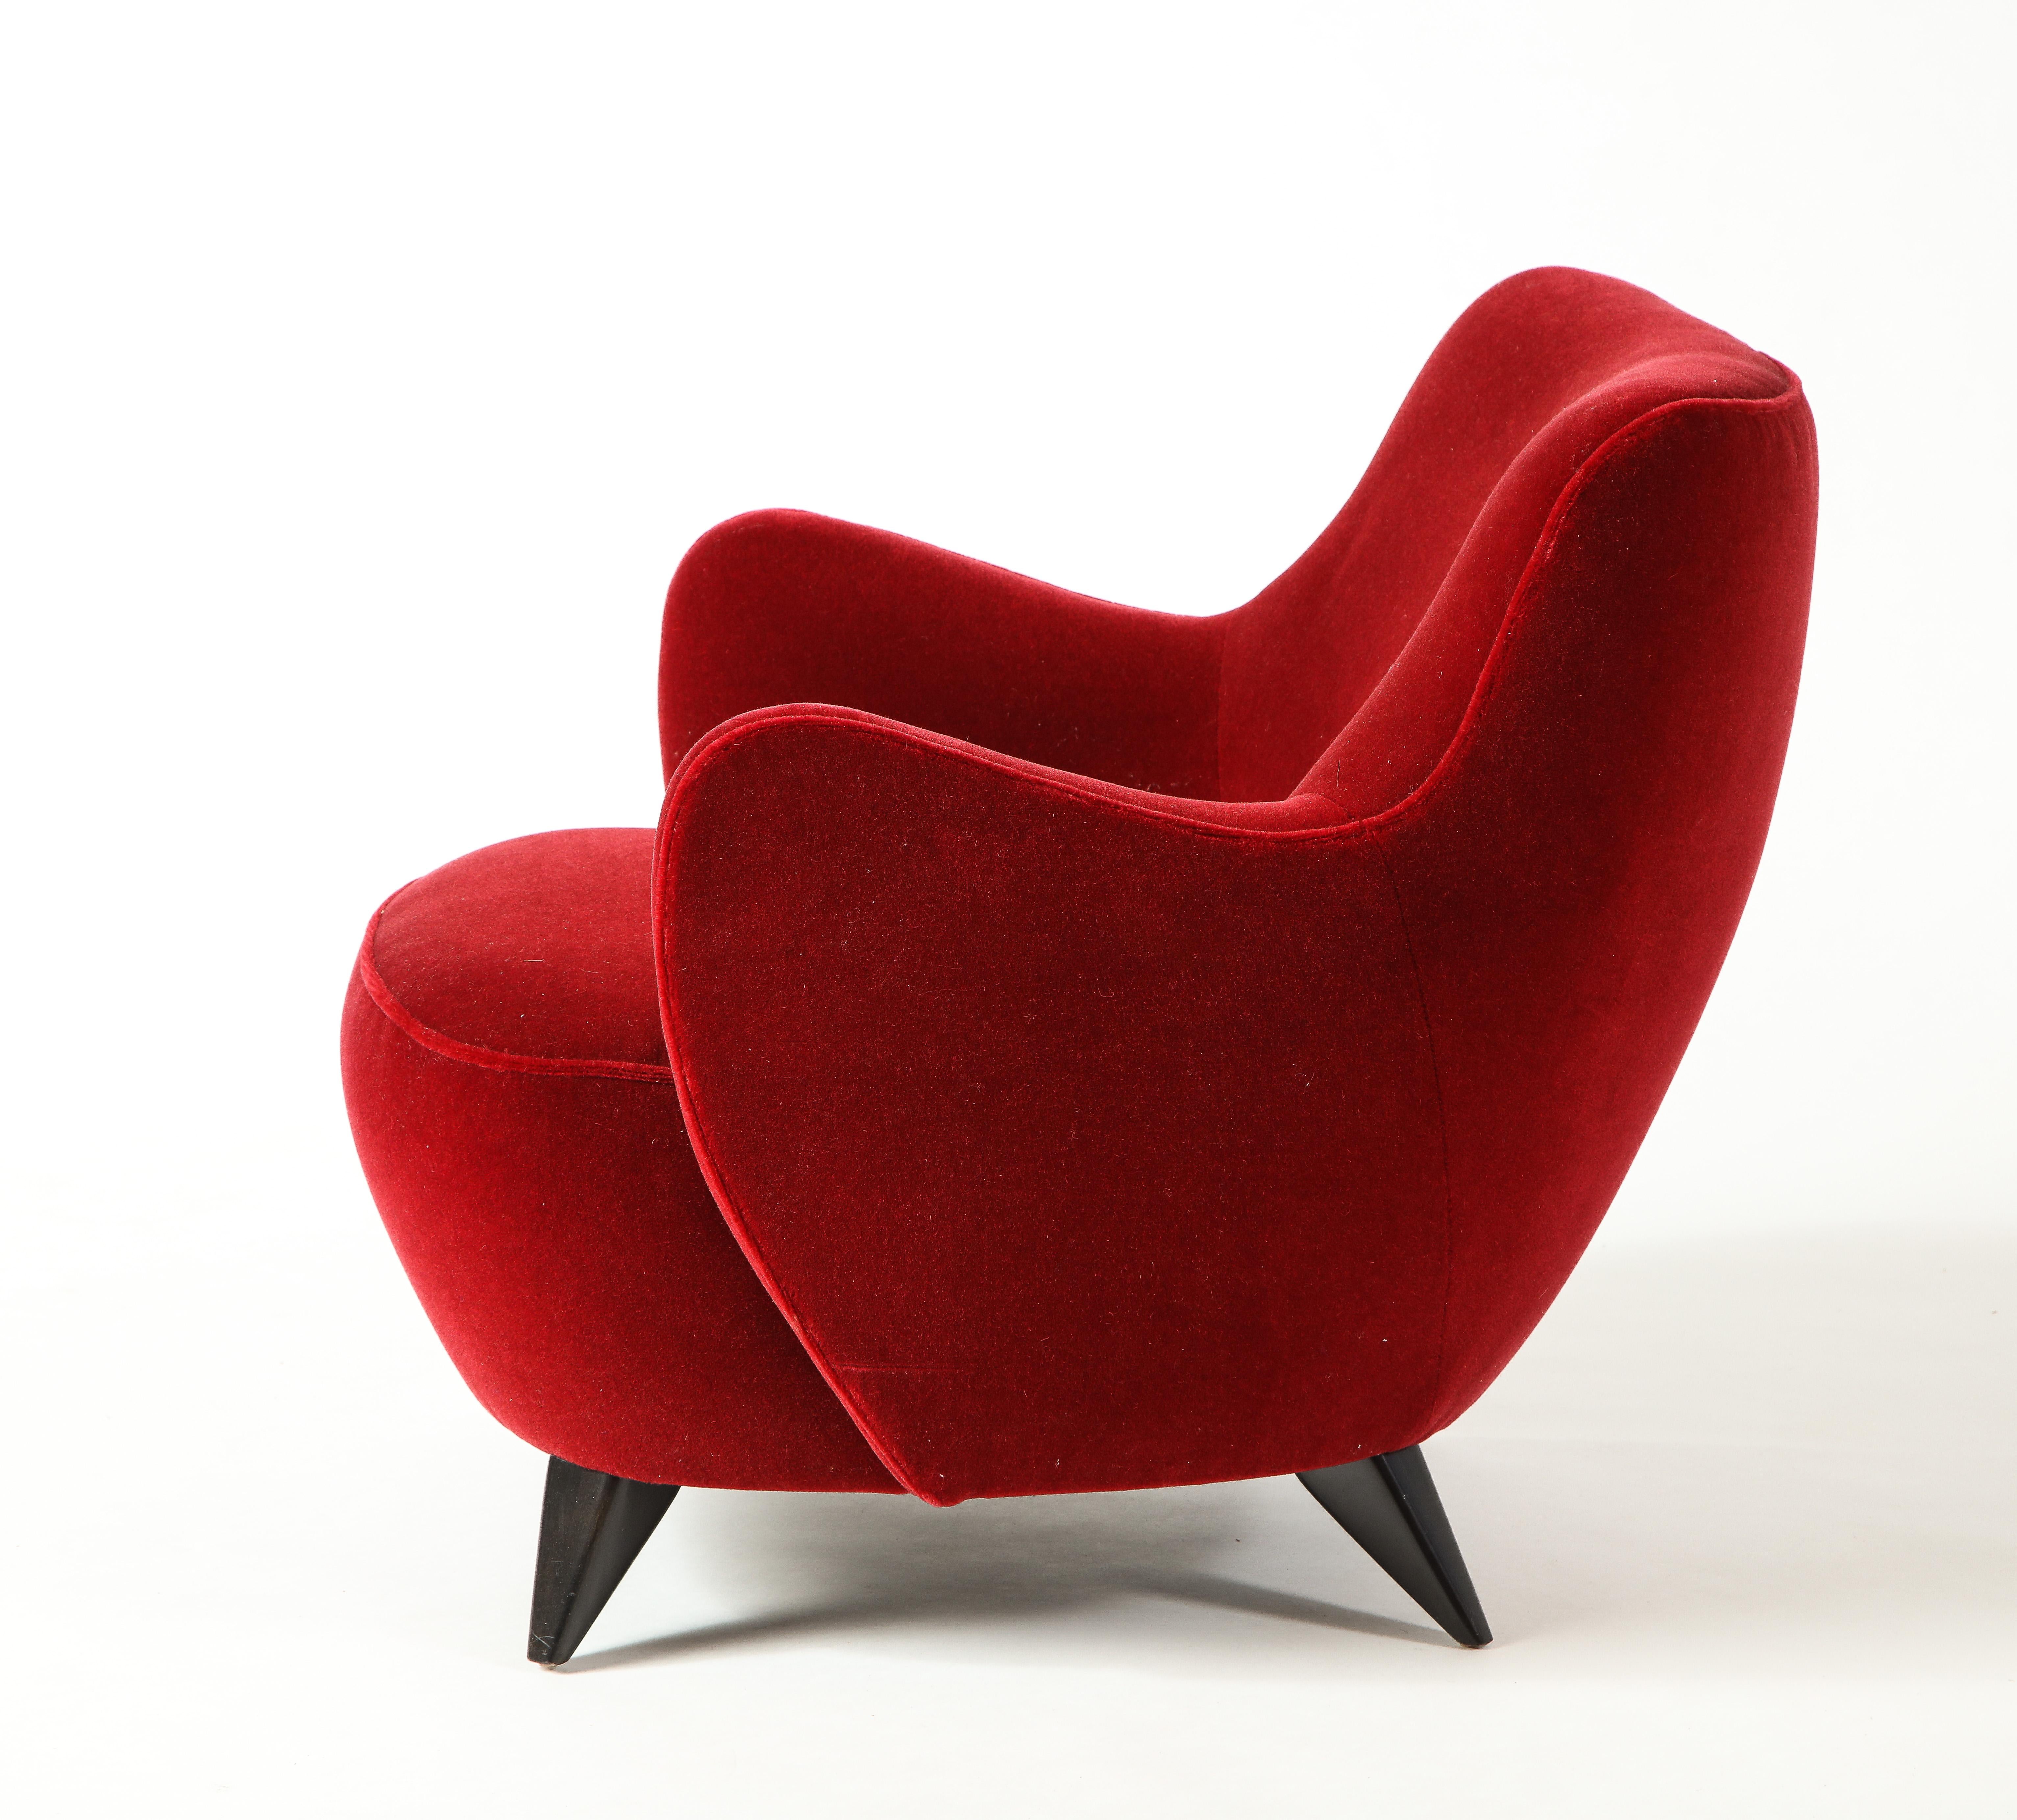 Modern Vladimir Kagan Barrel Chair in Red Mohair Upholstery with Ebony Base